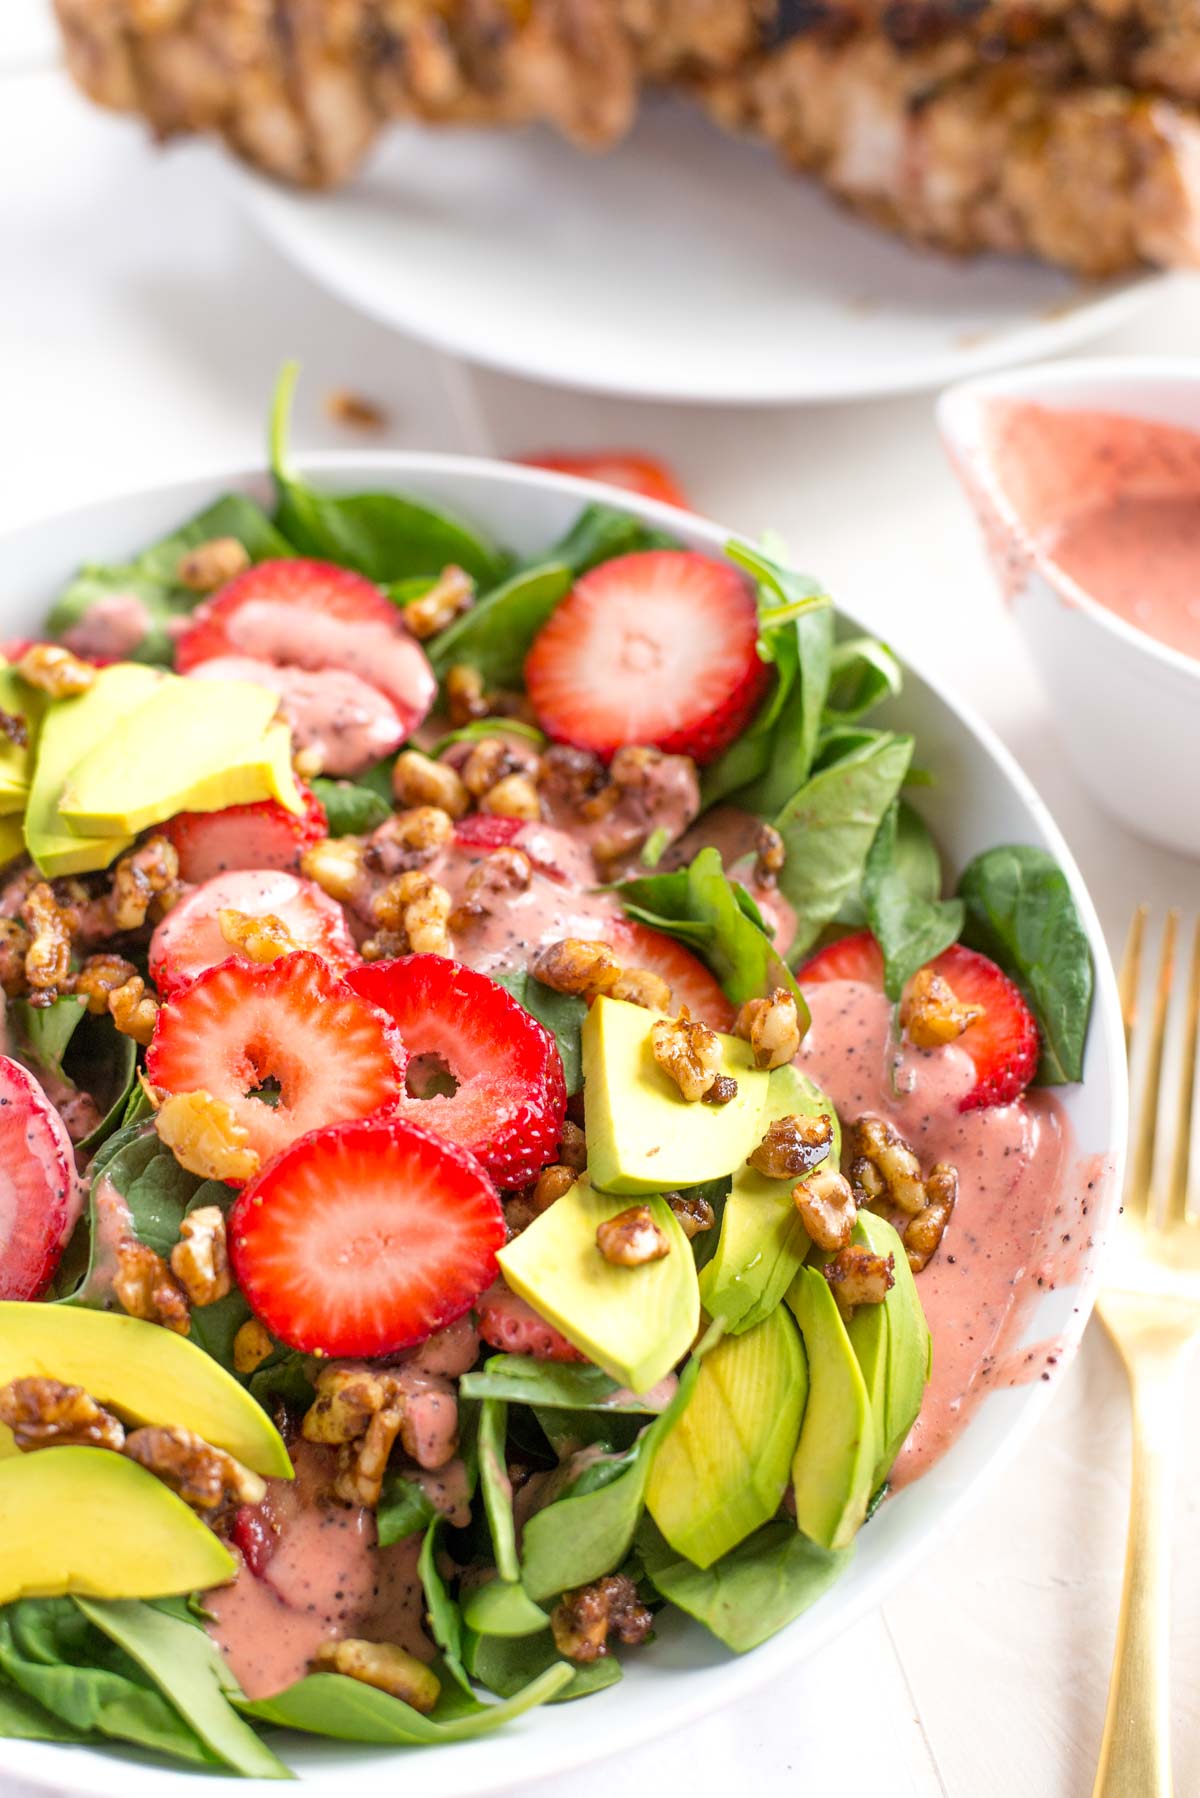 Healthy, fresh and flavorful I'd HIGHLY recommend adding this 10 minute Strawberry Spinach Salad to your meal plan this week. 